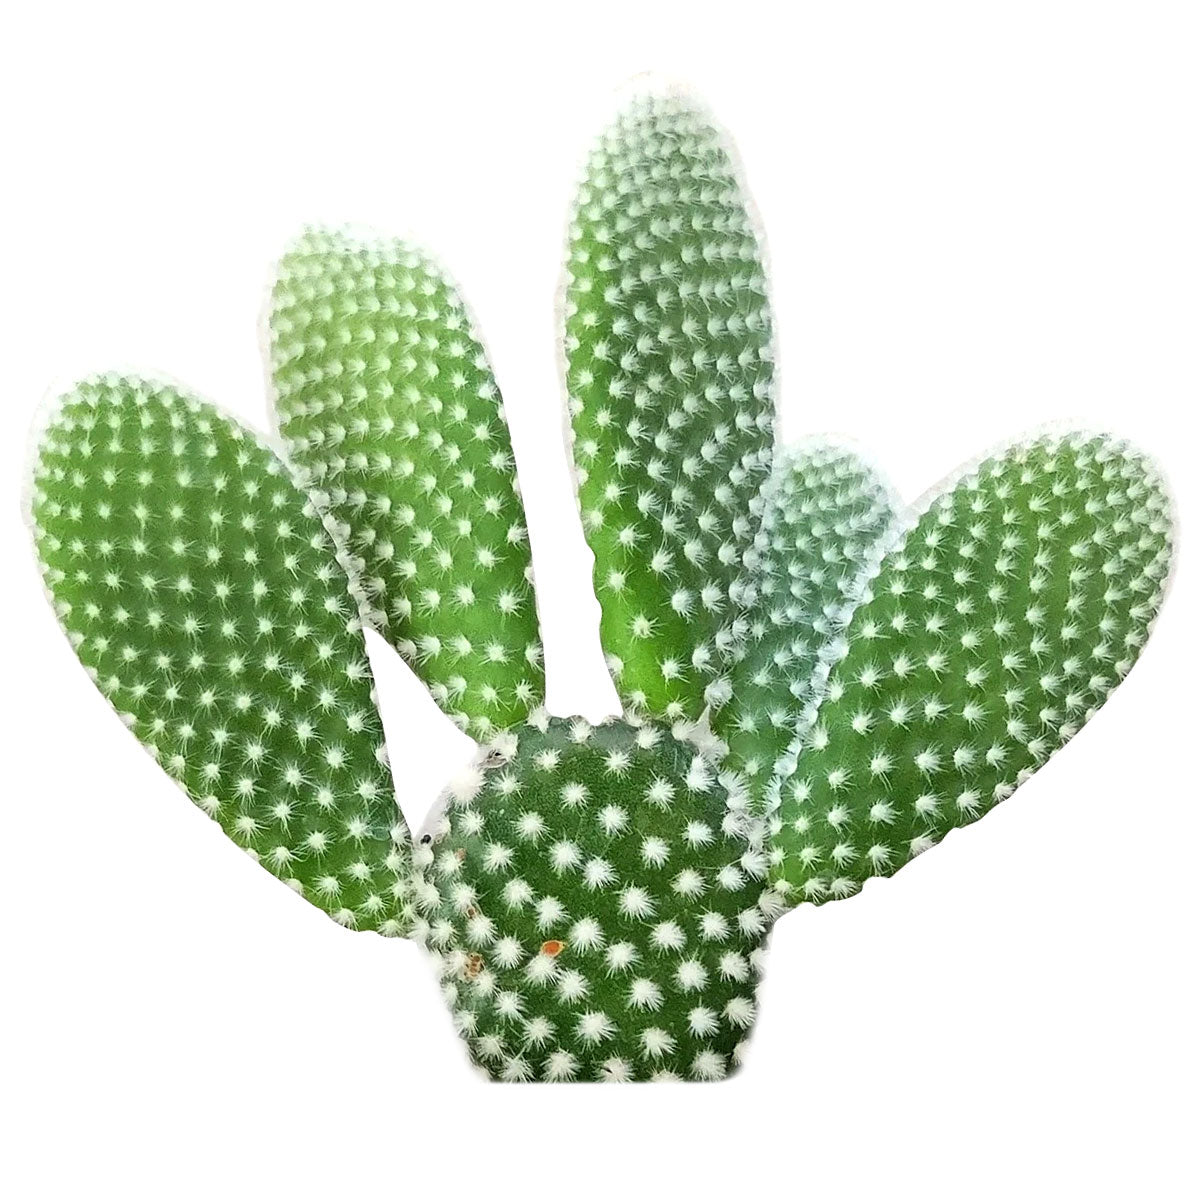 bunny ear cactus for sale, angel wing cactus, cactus succulent, opuntia microdasys, prickly pear cactus, buy cactus online, polka dot cactus, small, large potted cactus